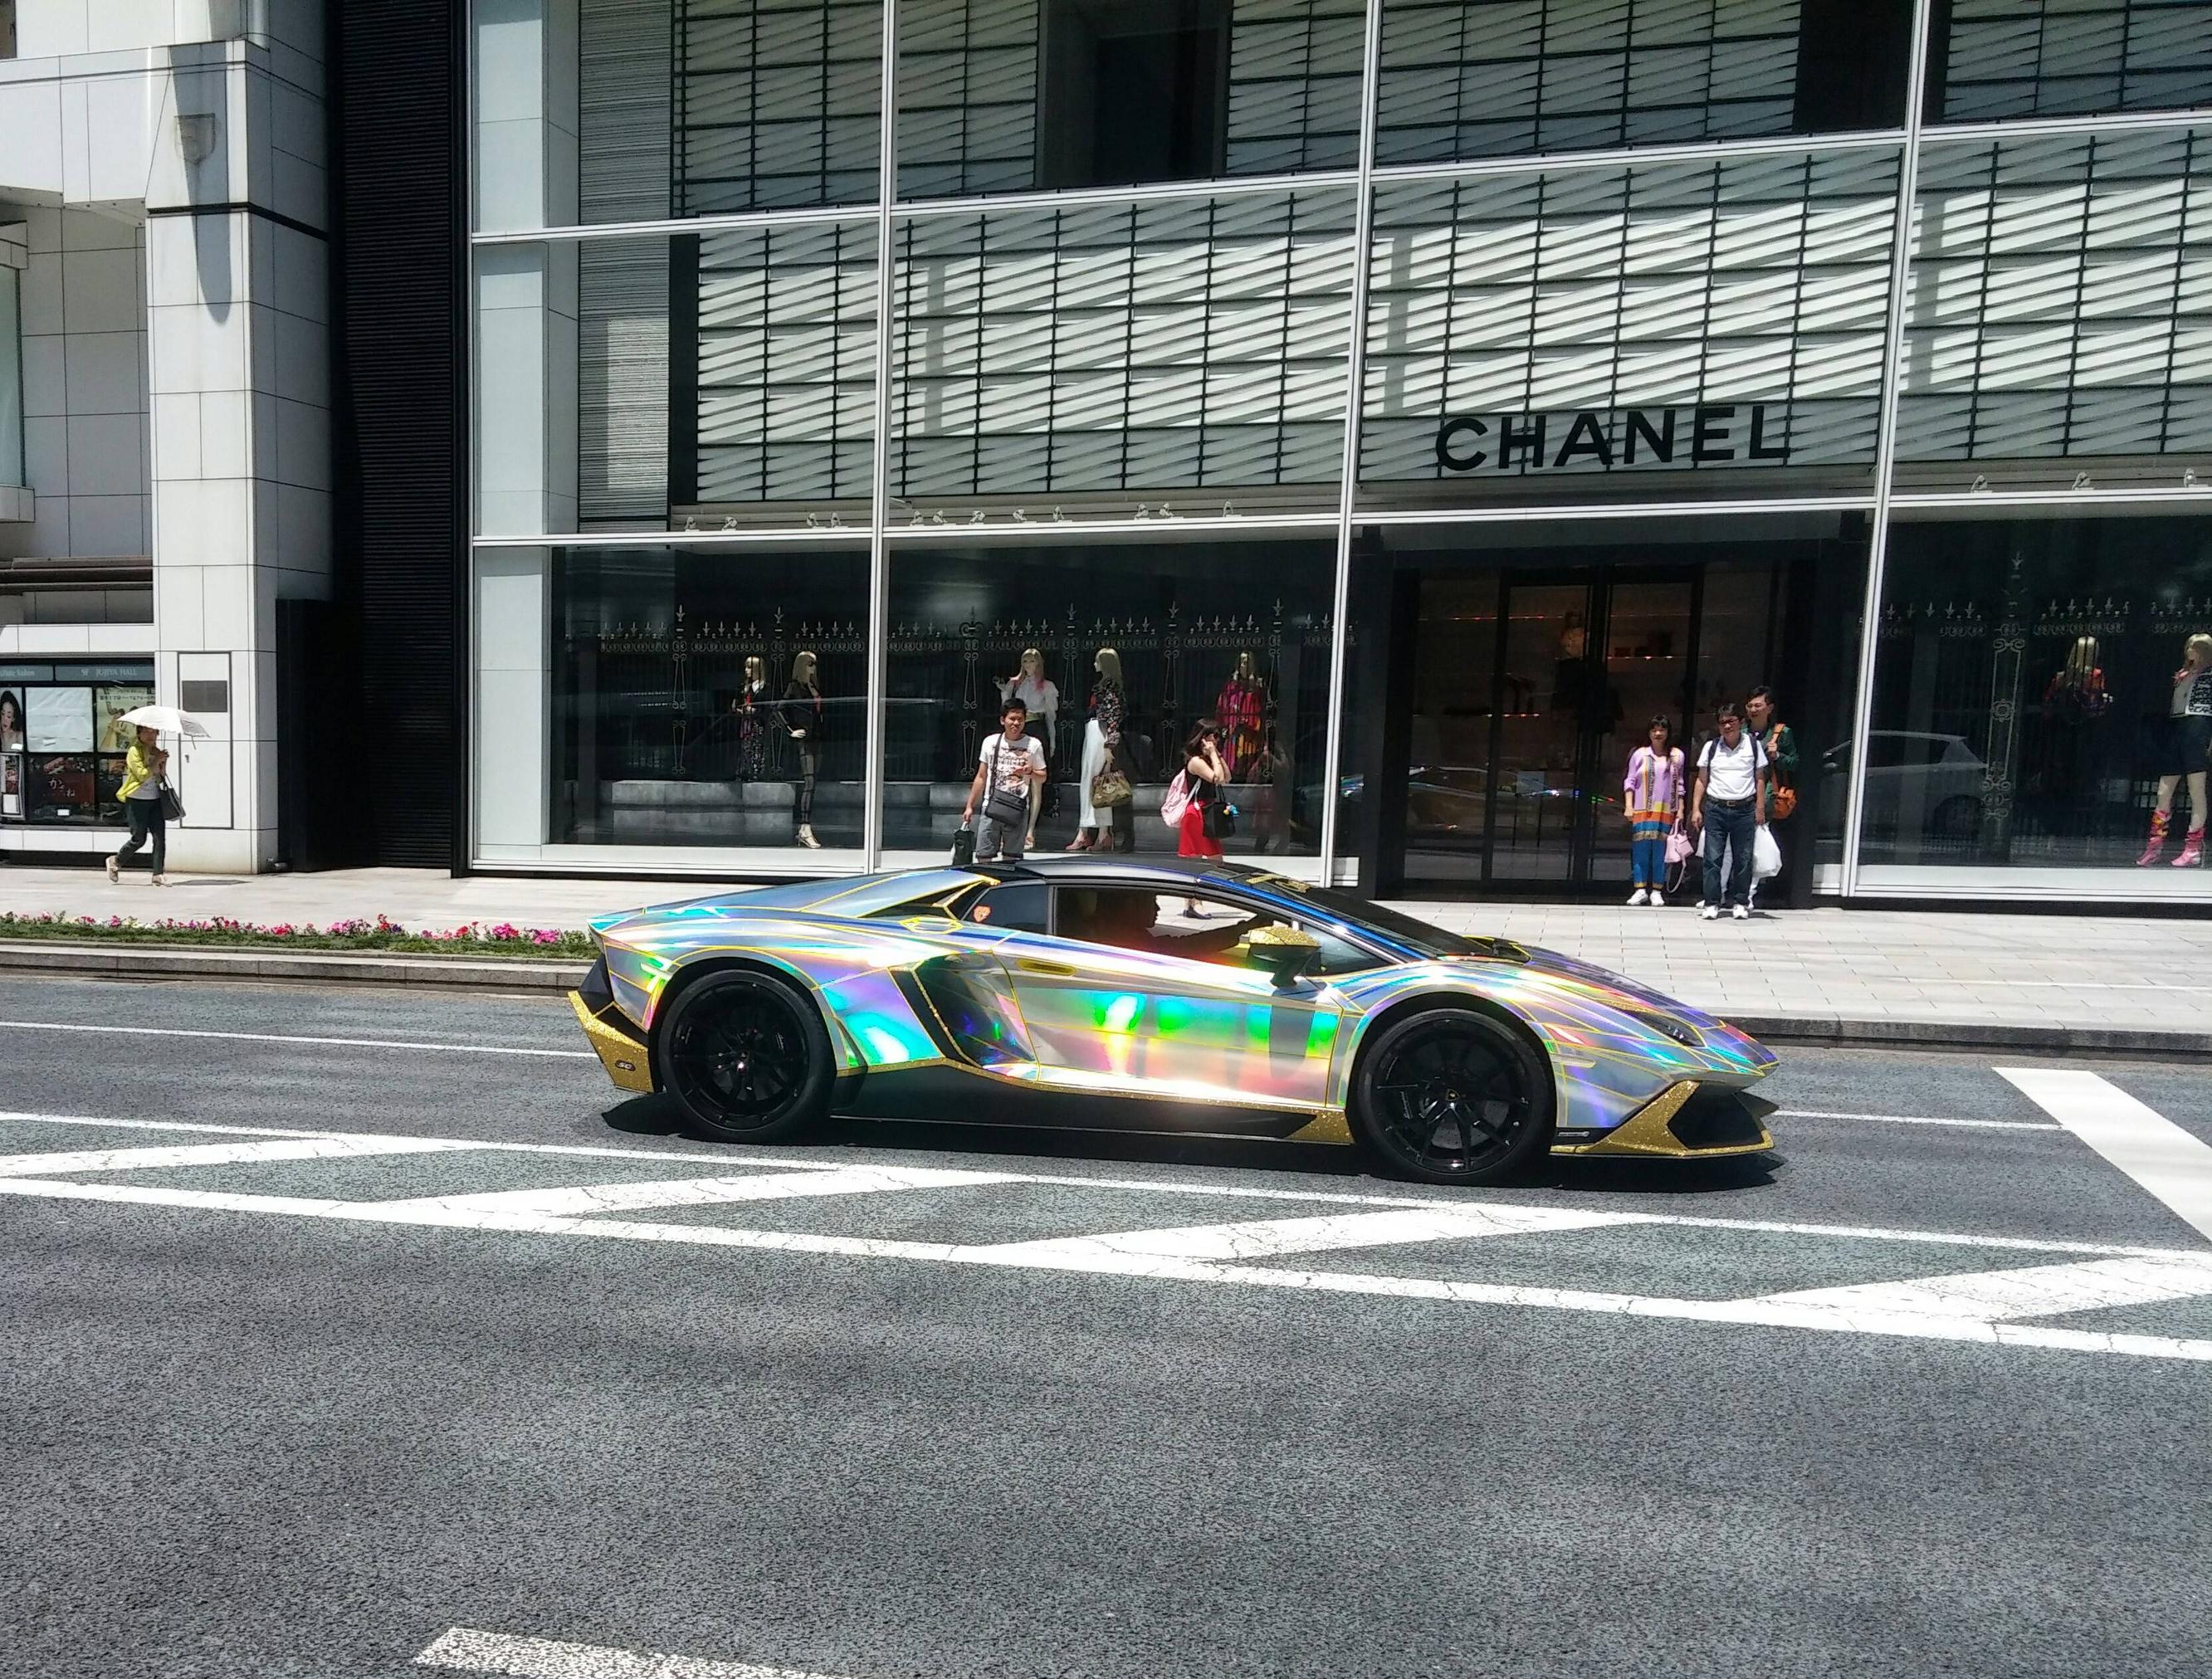 coolest car ever seen - Chanel